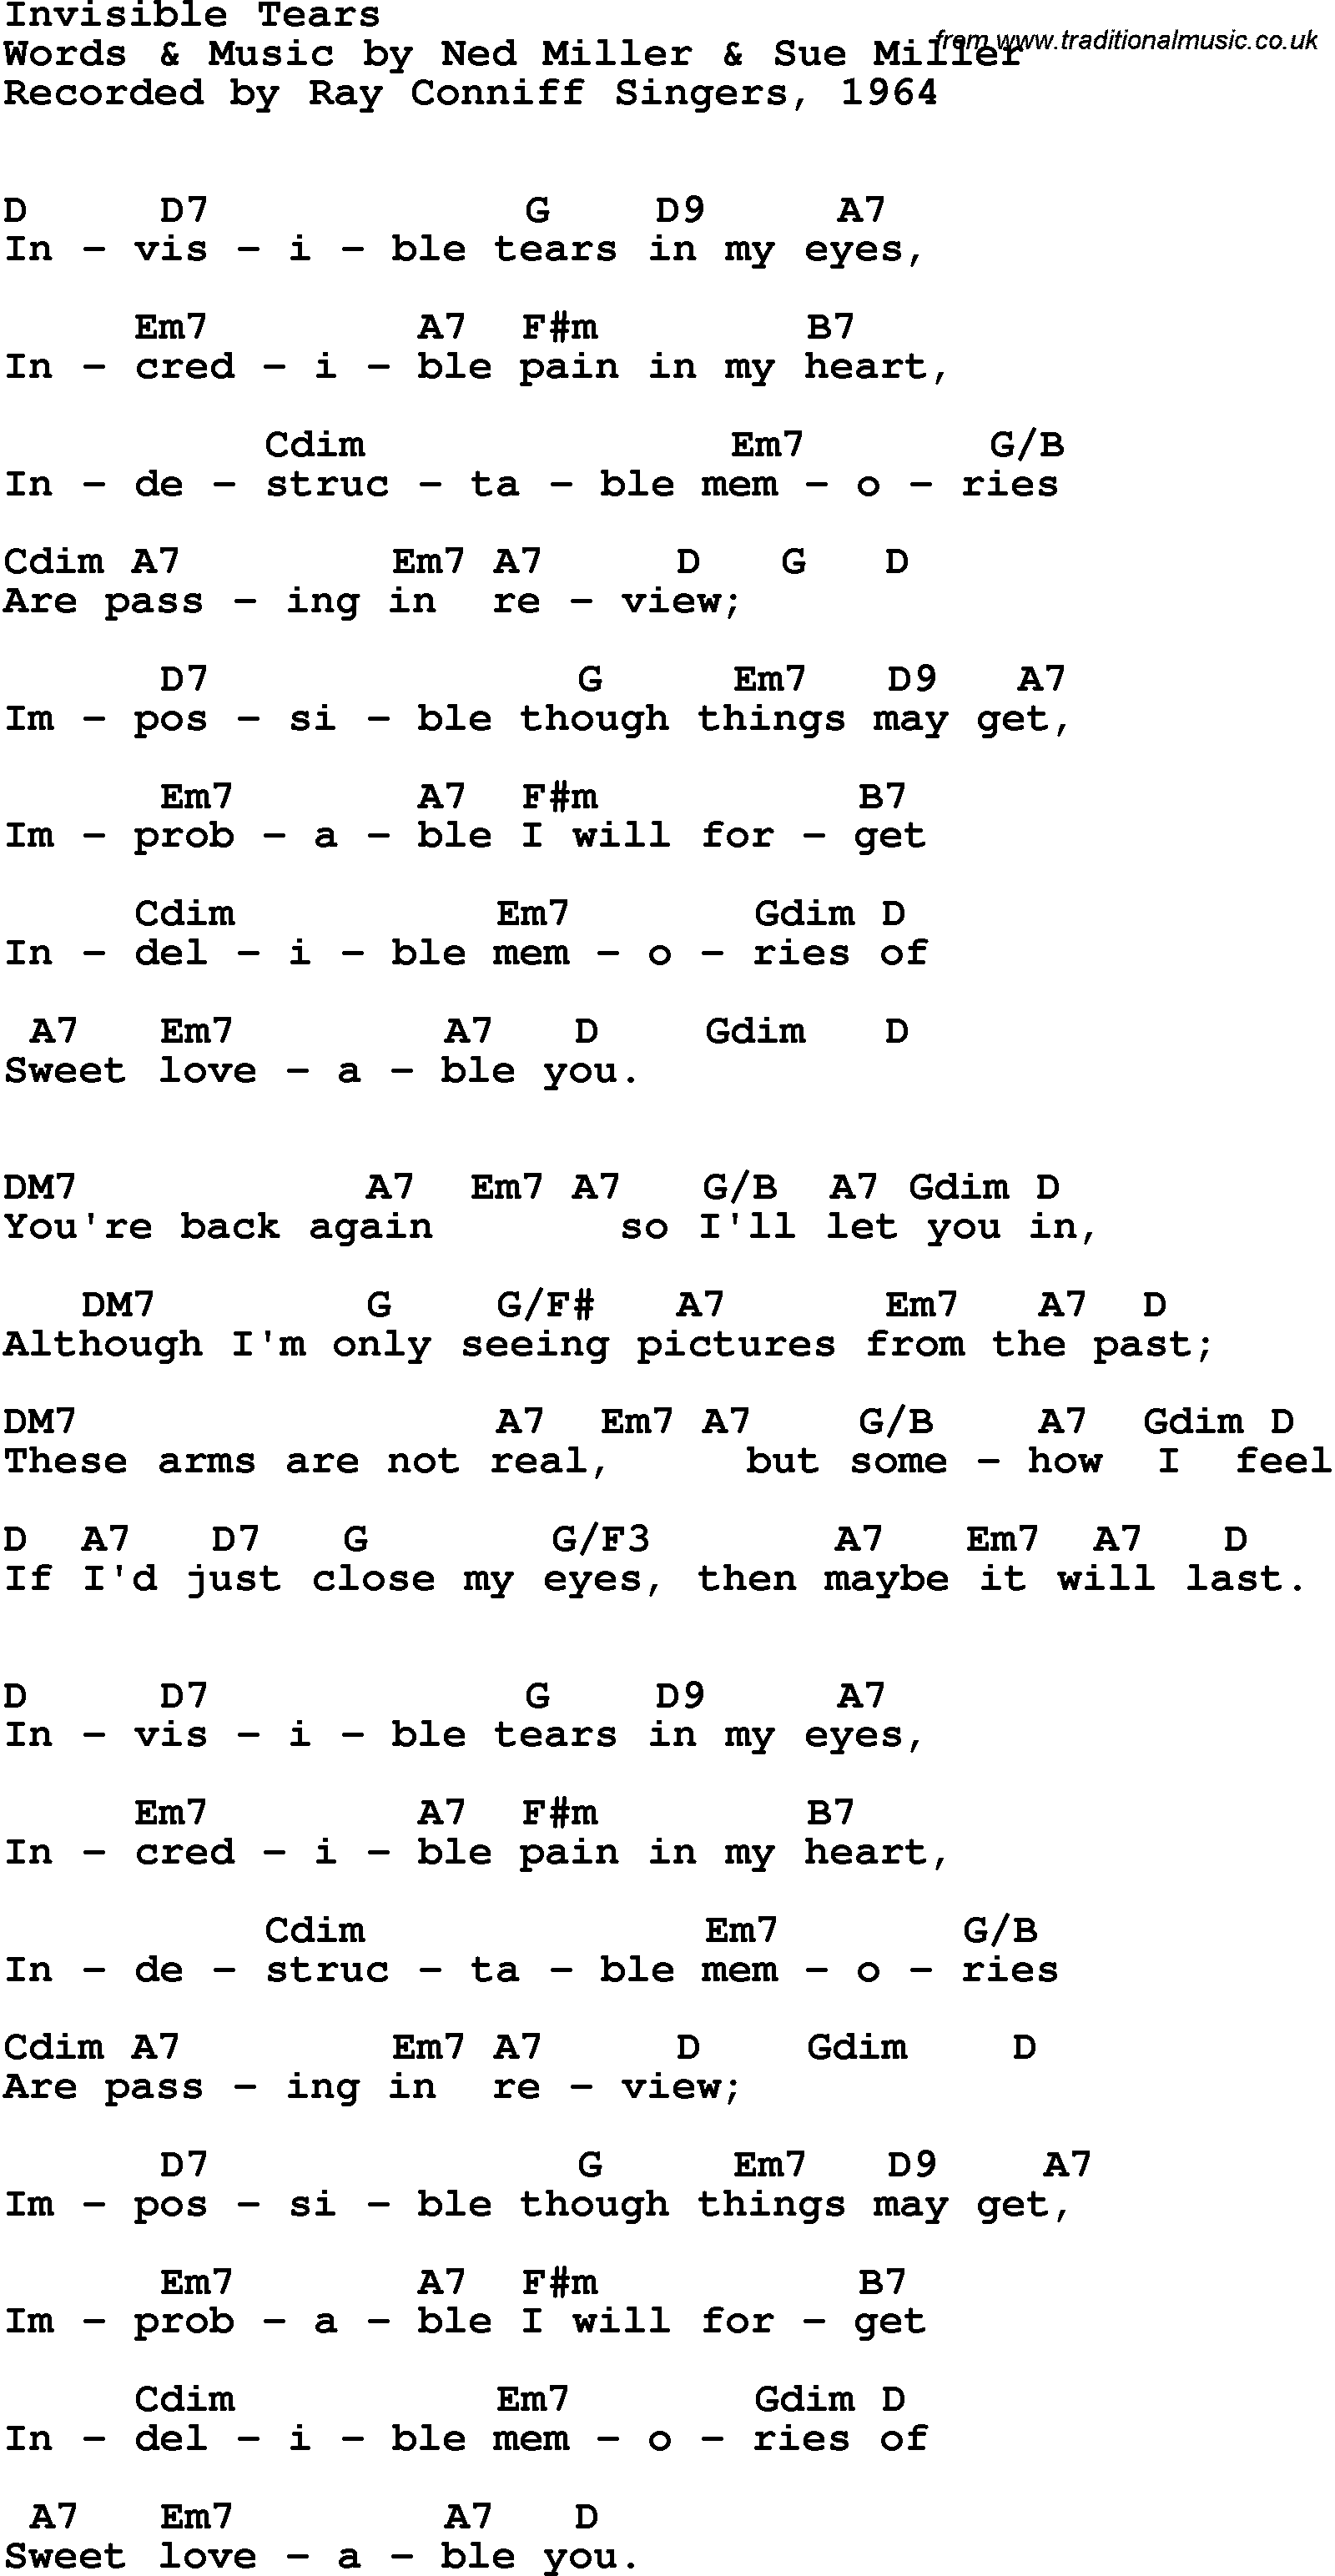 Song Lyrics with guitar chords for Invisible Tears - Ray Conniff Singers, 1964